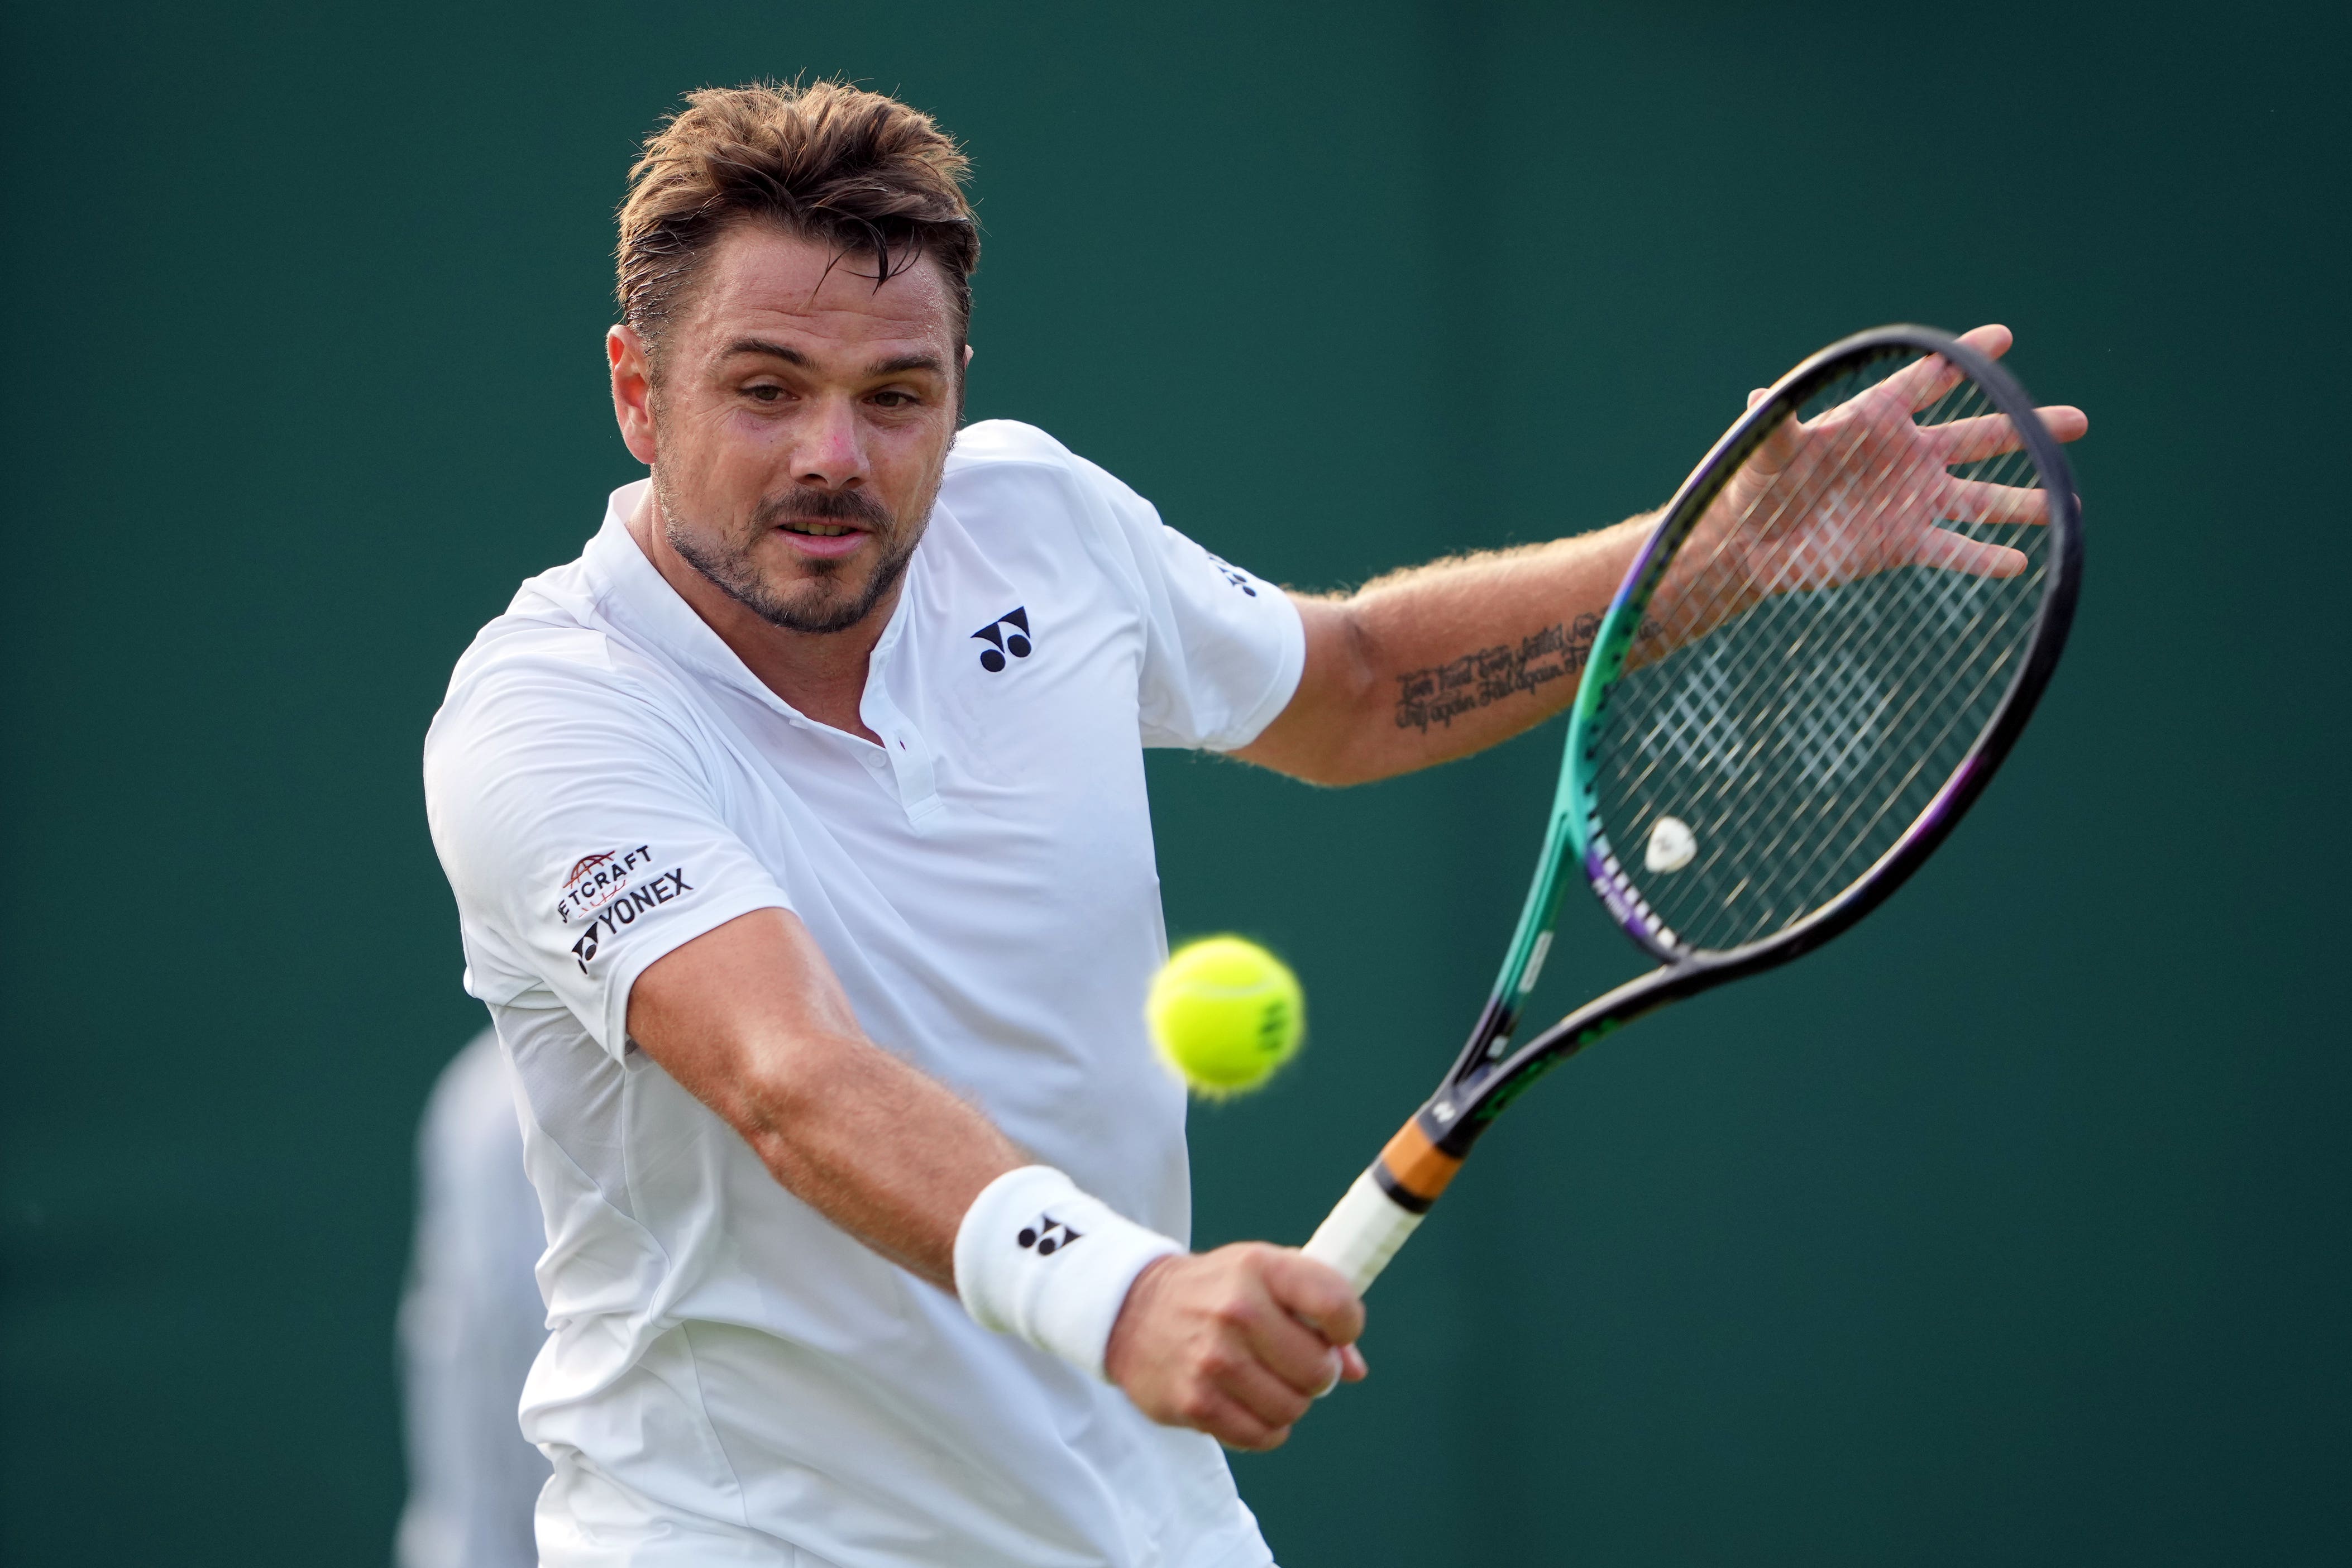 Stan Wawrinka on setbacks, preparing for Wimbledon and friendship with Roger Federer The Independent picture